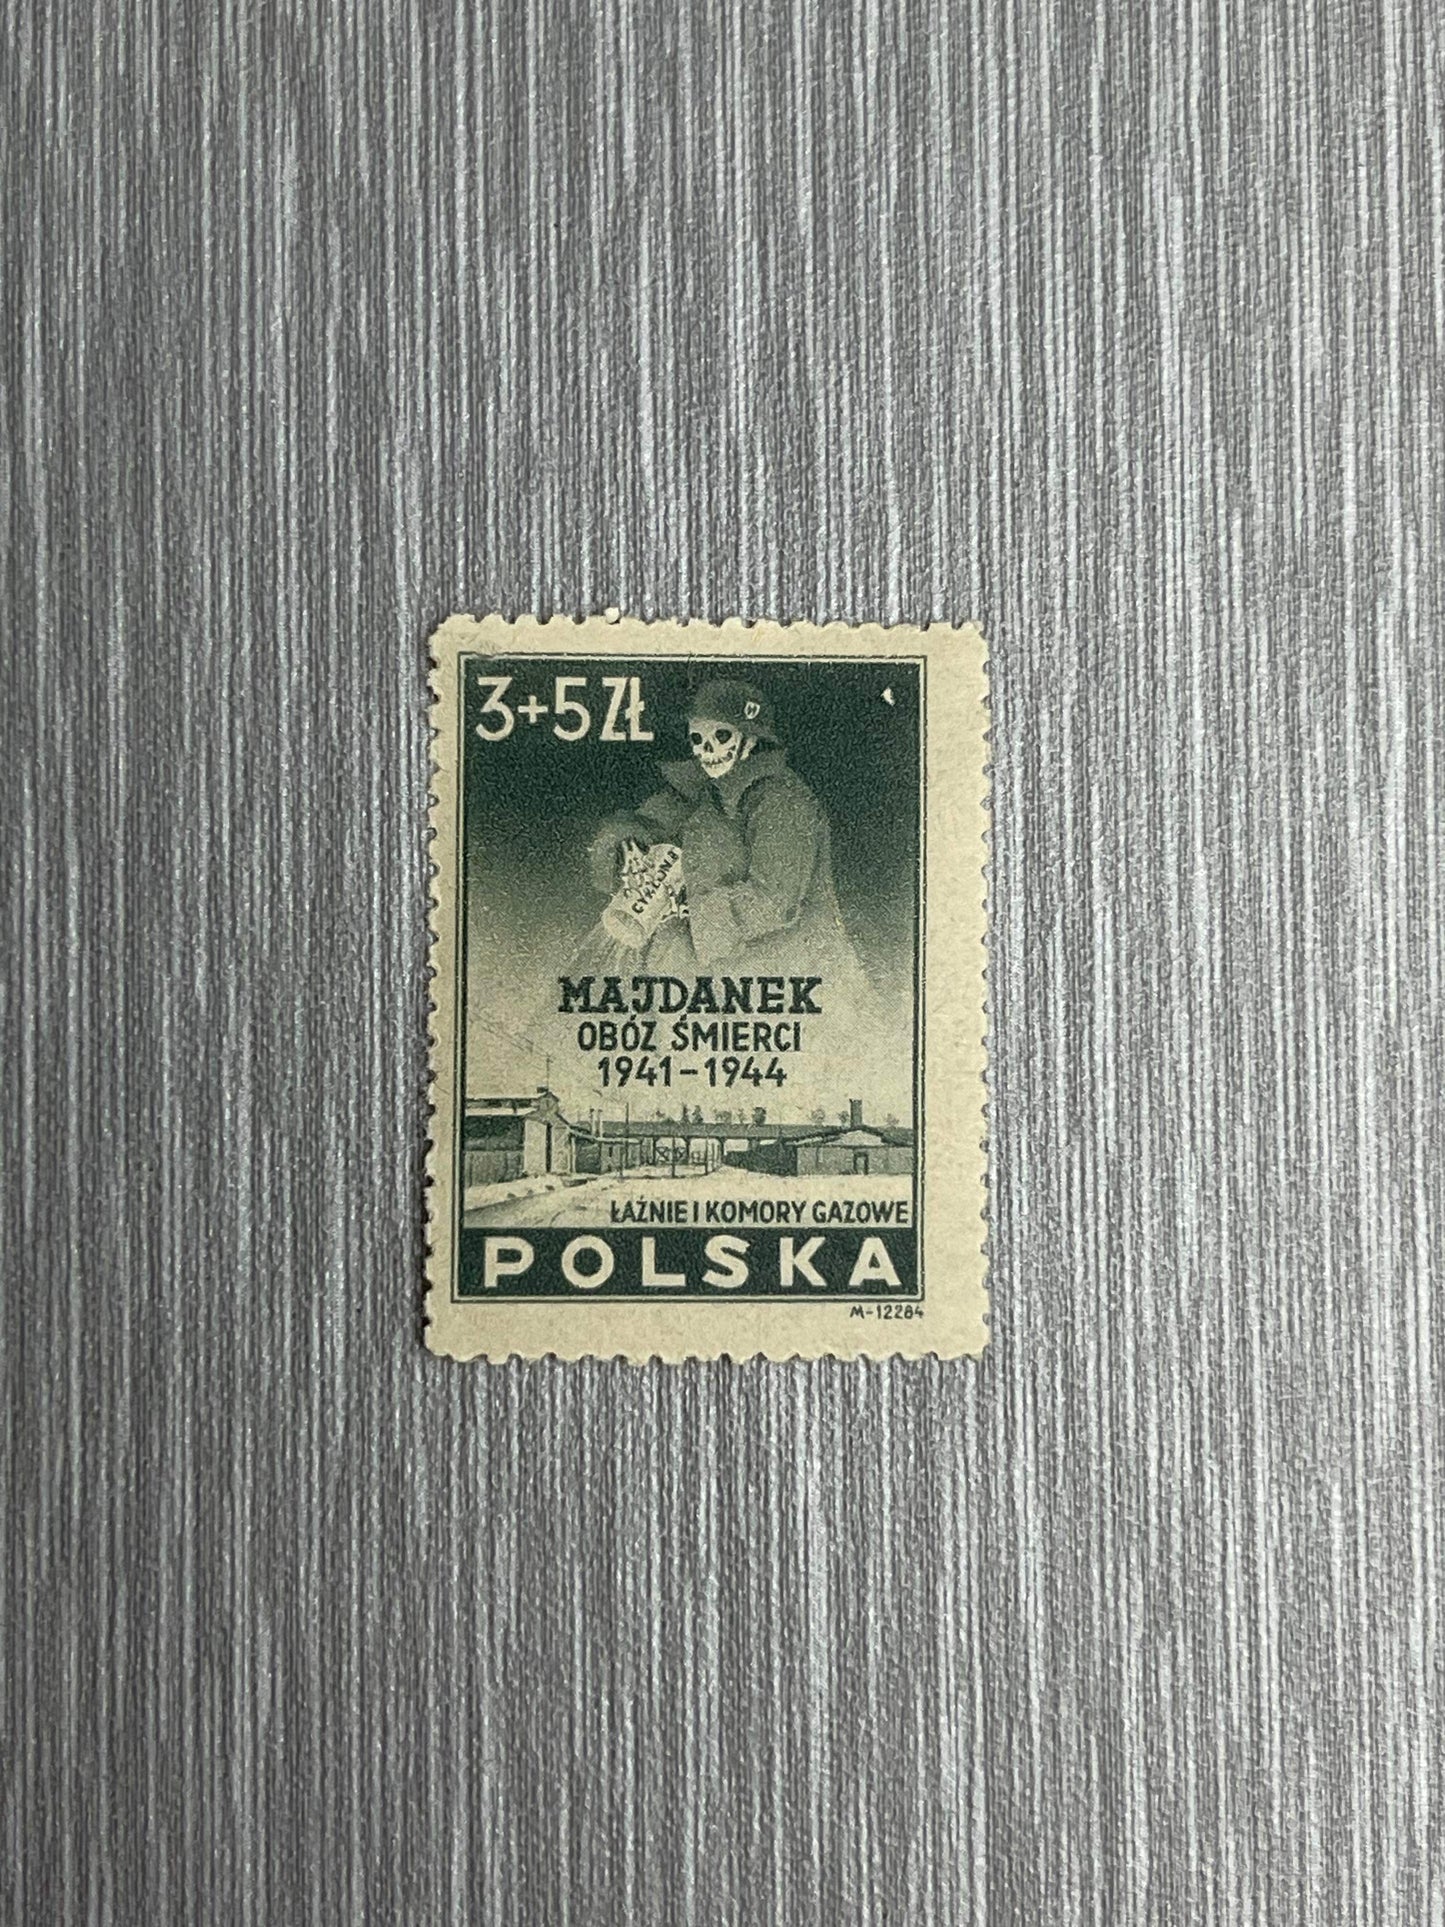 POLISH POST WW2 1946 STAMP COMMEMORATING THE LIBERATION OF A CONCENTRATION CAMP "MAJDANEK"